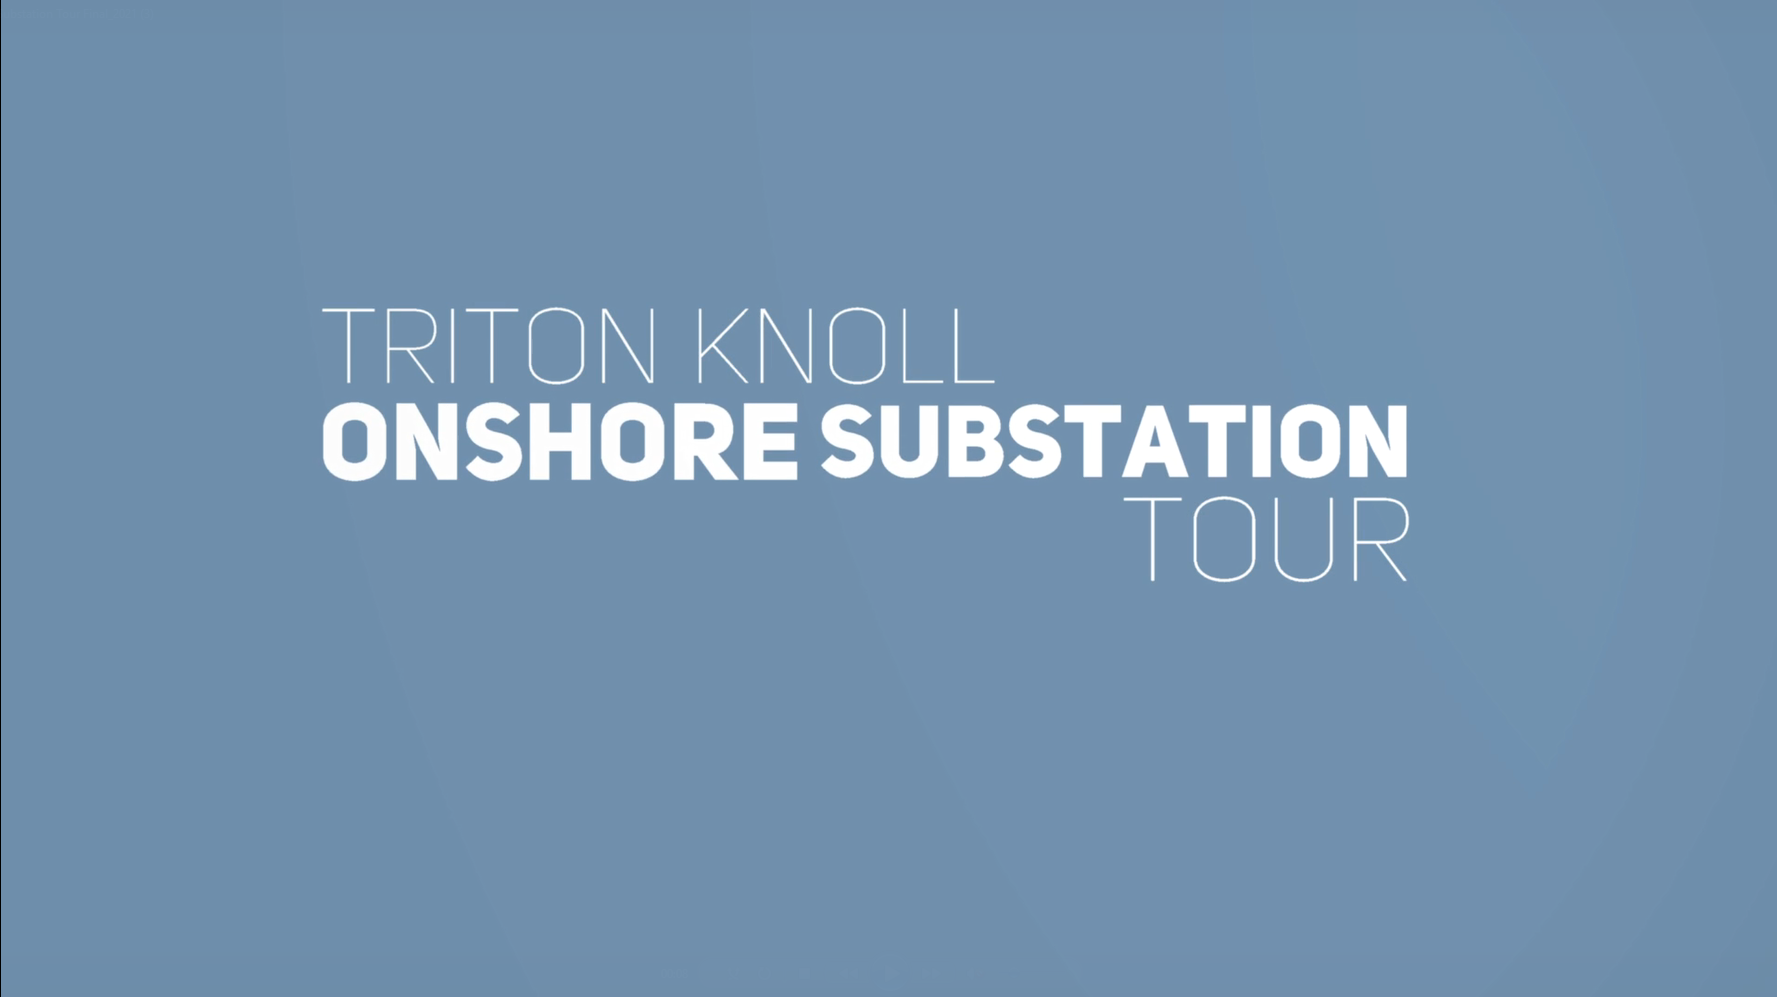 Triton Knoll Onshore Substation Virtual Tour now launched